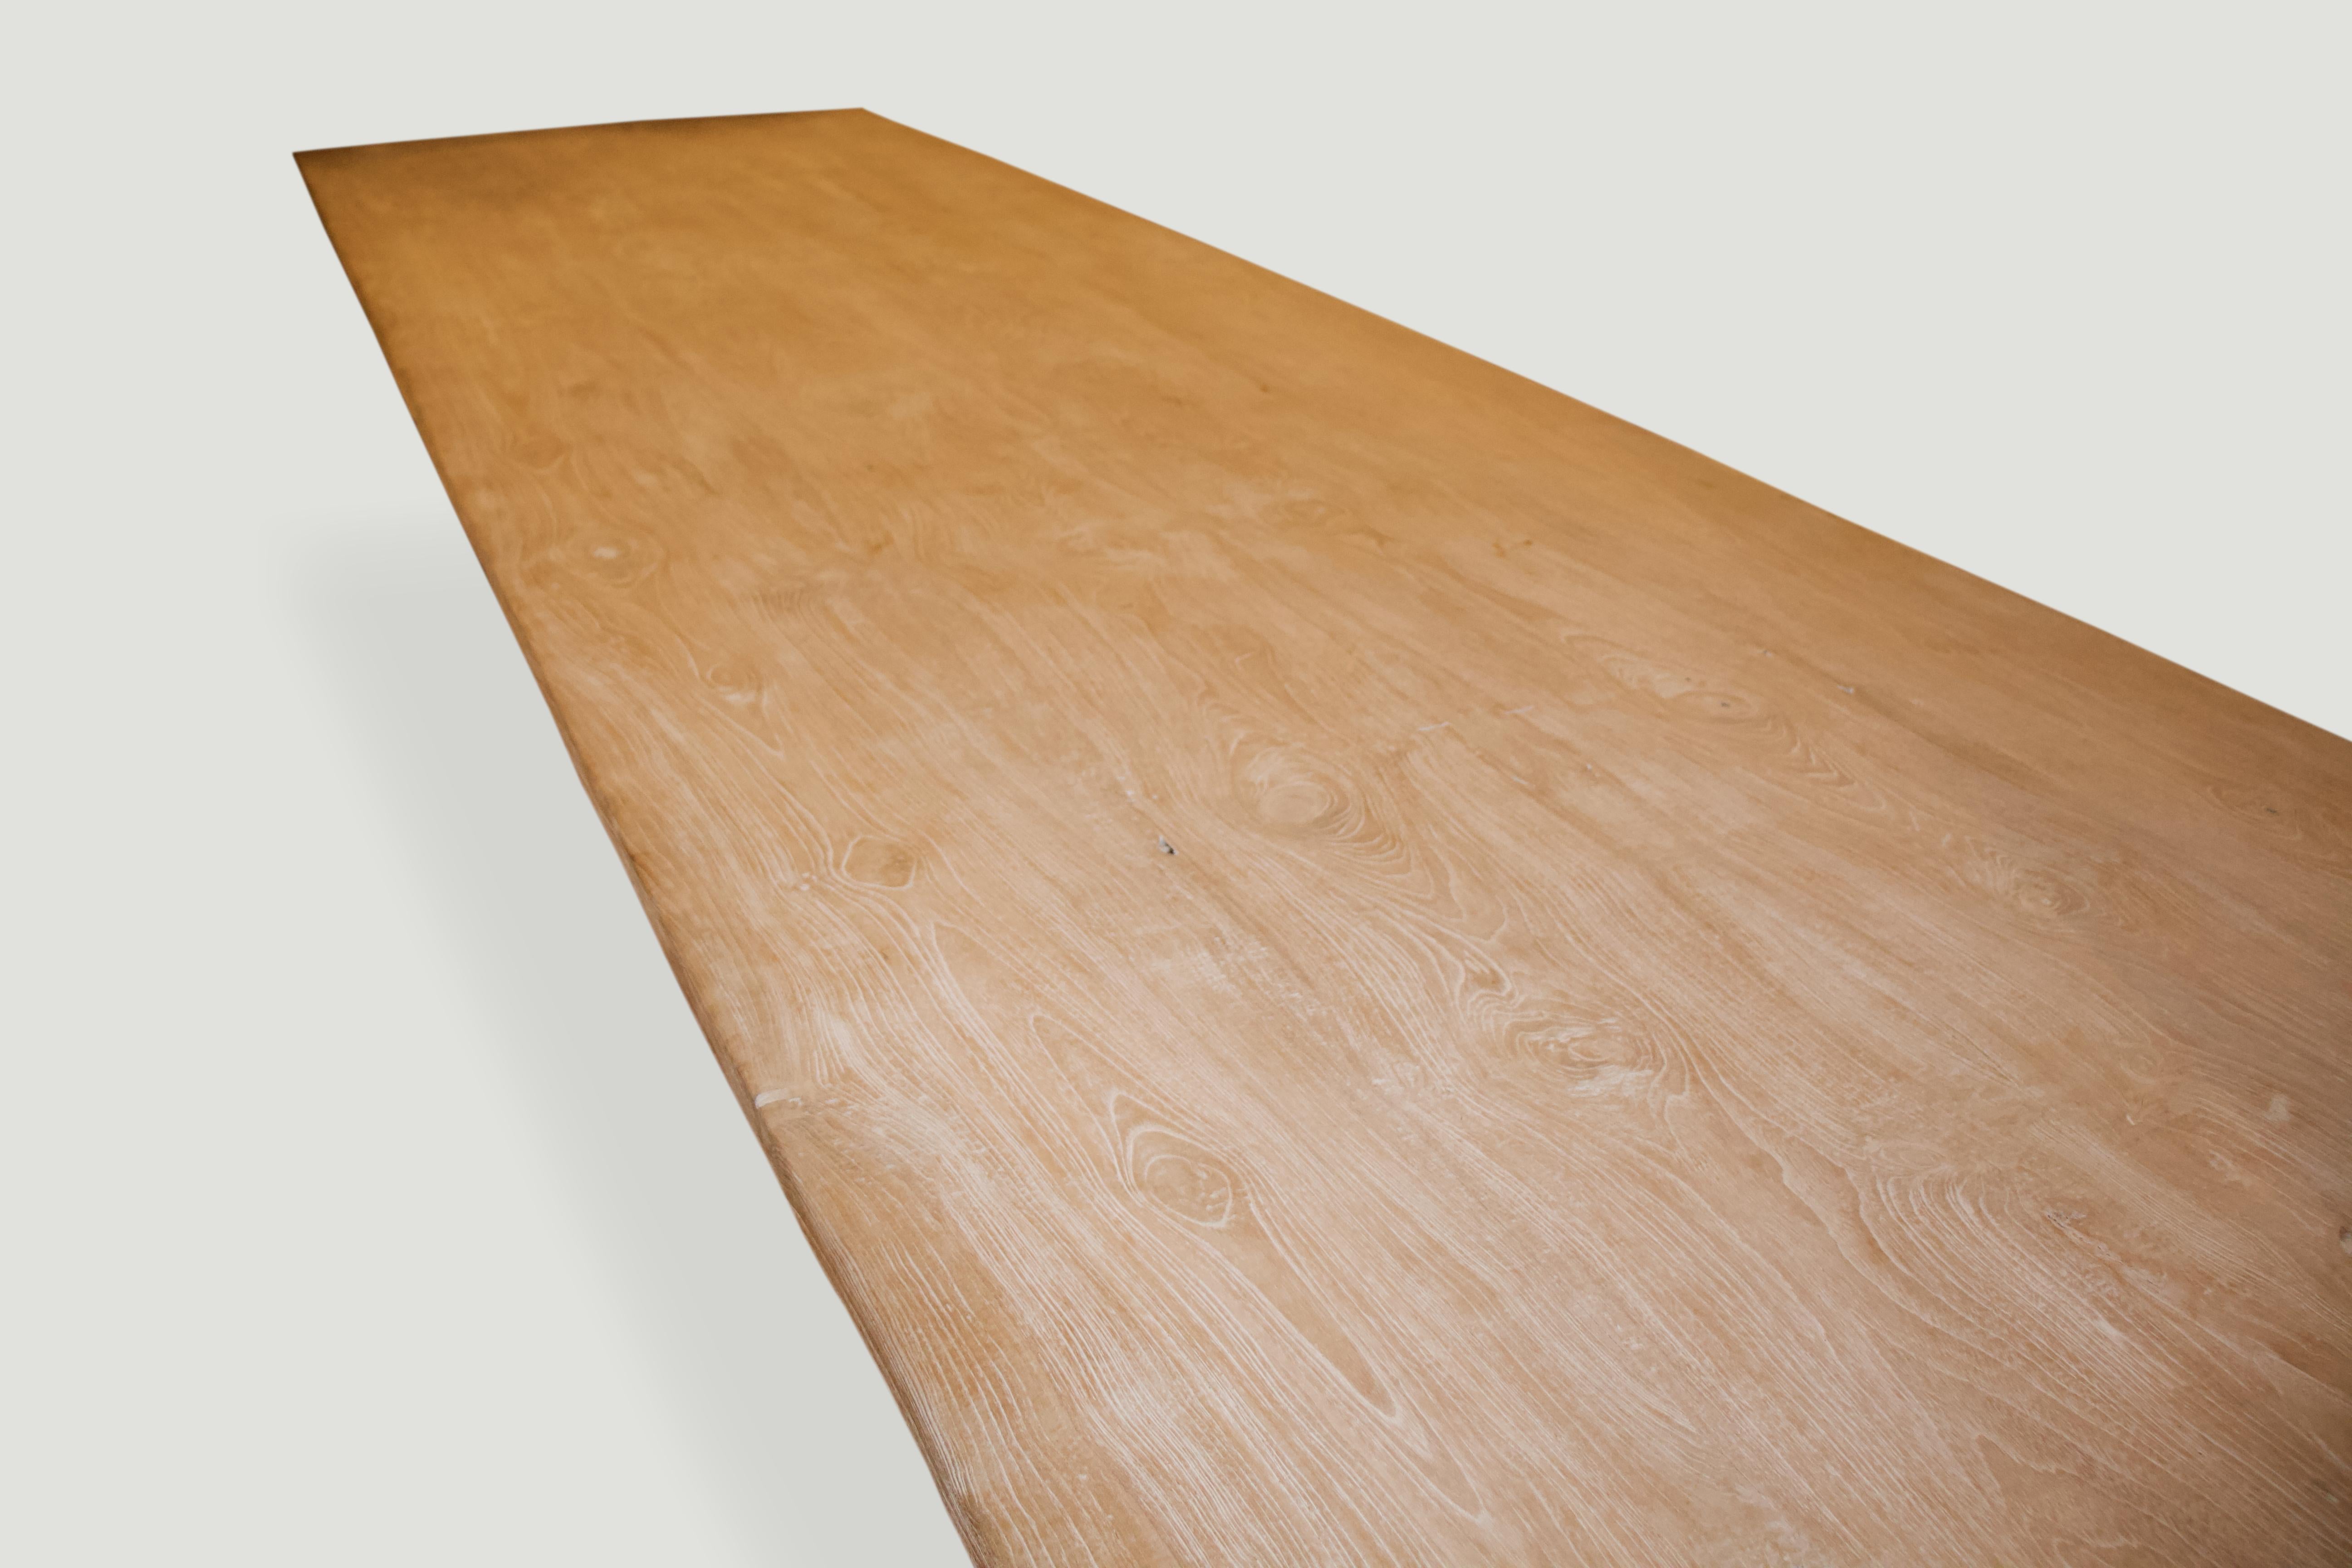 Reclaimed teak dining table comprising of four 1.5″ slabs joined. We added a light white wash finish allowing the grain of the teak wood to show. Floating on a 3” thick base. Custom stains available.

The St. Barts Collection features an exciting